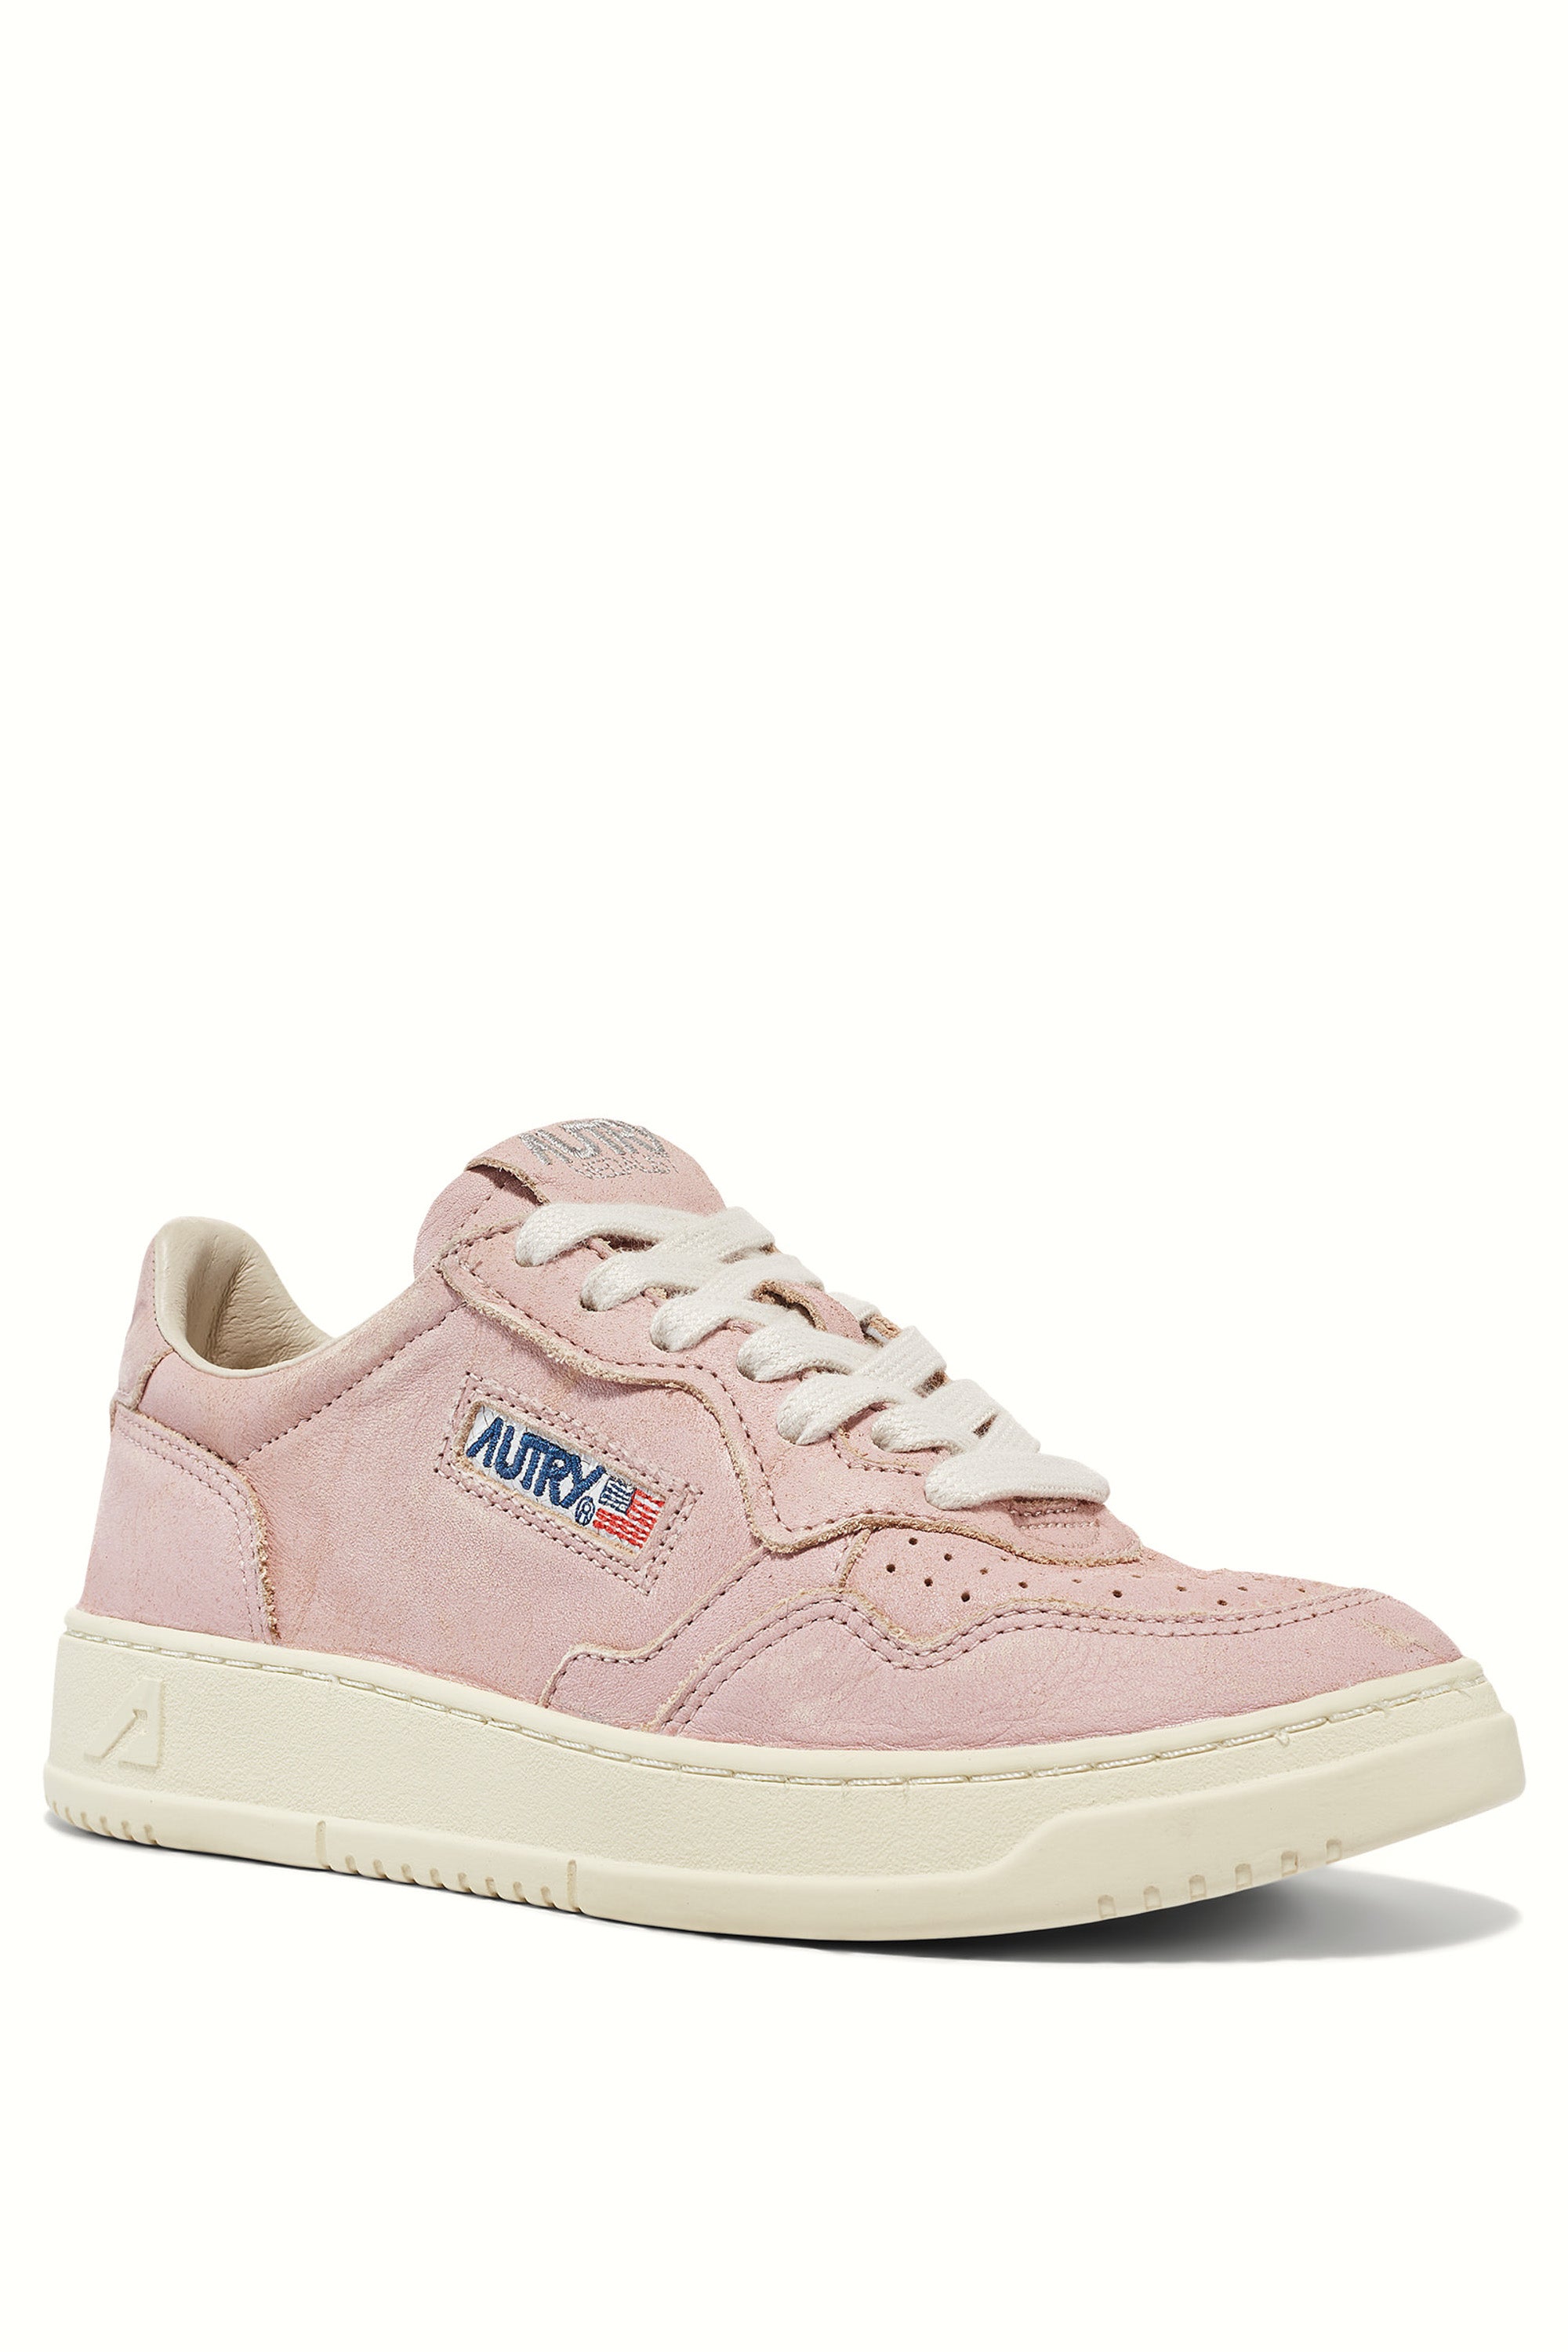 Women's Medalist sneaker in supersoft cowhide leather